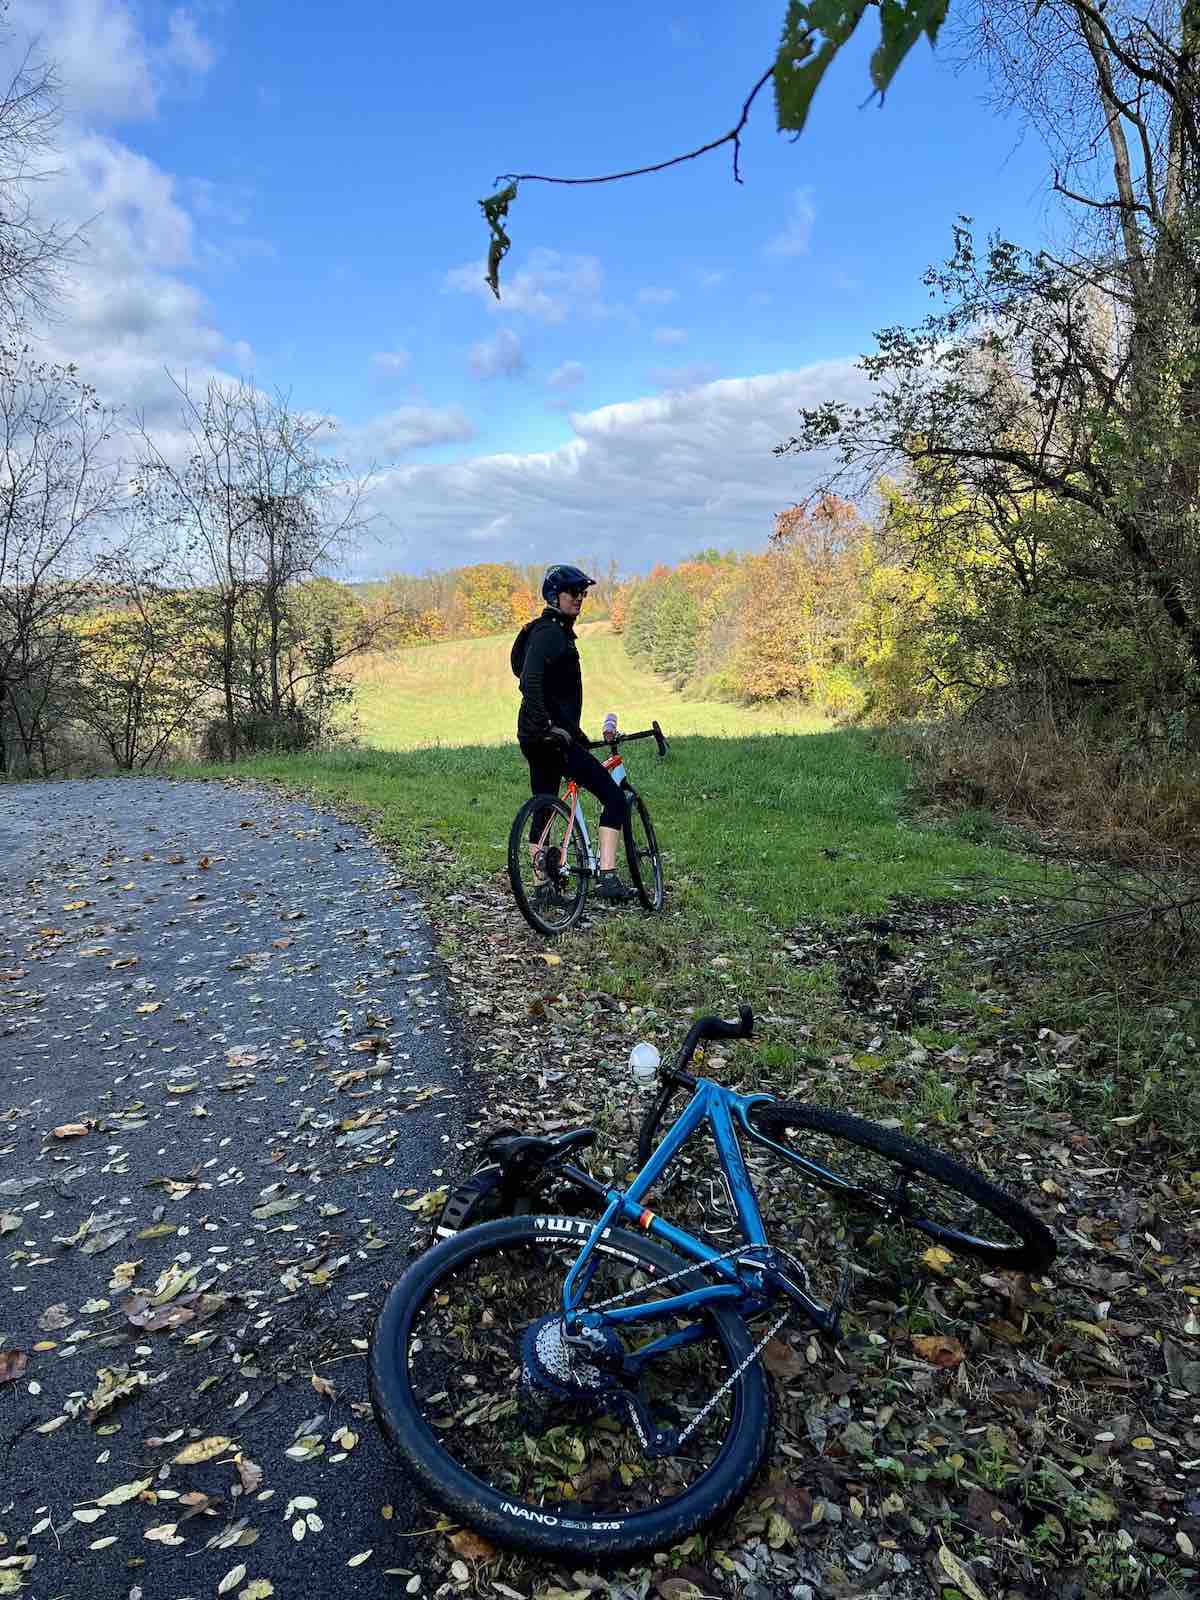 bikerumor pic of the day a cyclist looks back at the photographer whose bike is laying on the ground in front of them beside an asphalt road covered in fall leaves, the grass is green, and the trees beside the road are changing red and yellow, the sky is bright blue with a hint of clouds in the distance.